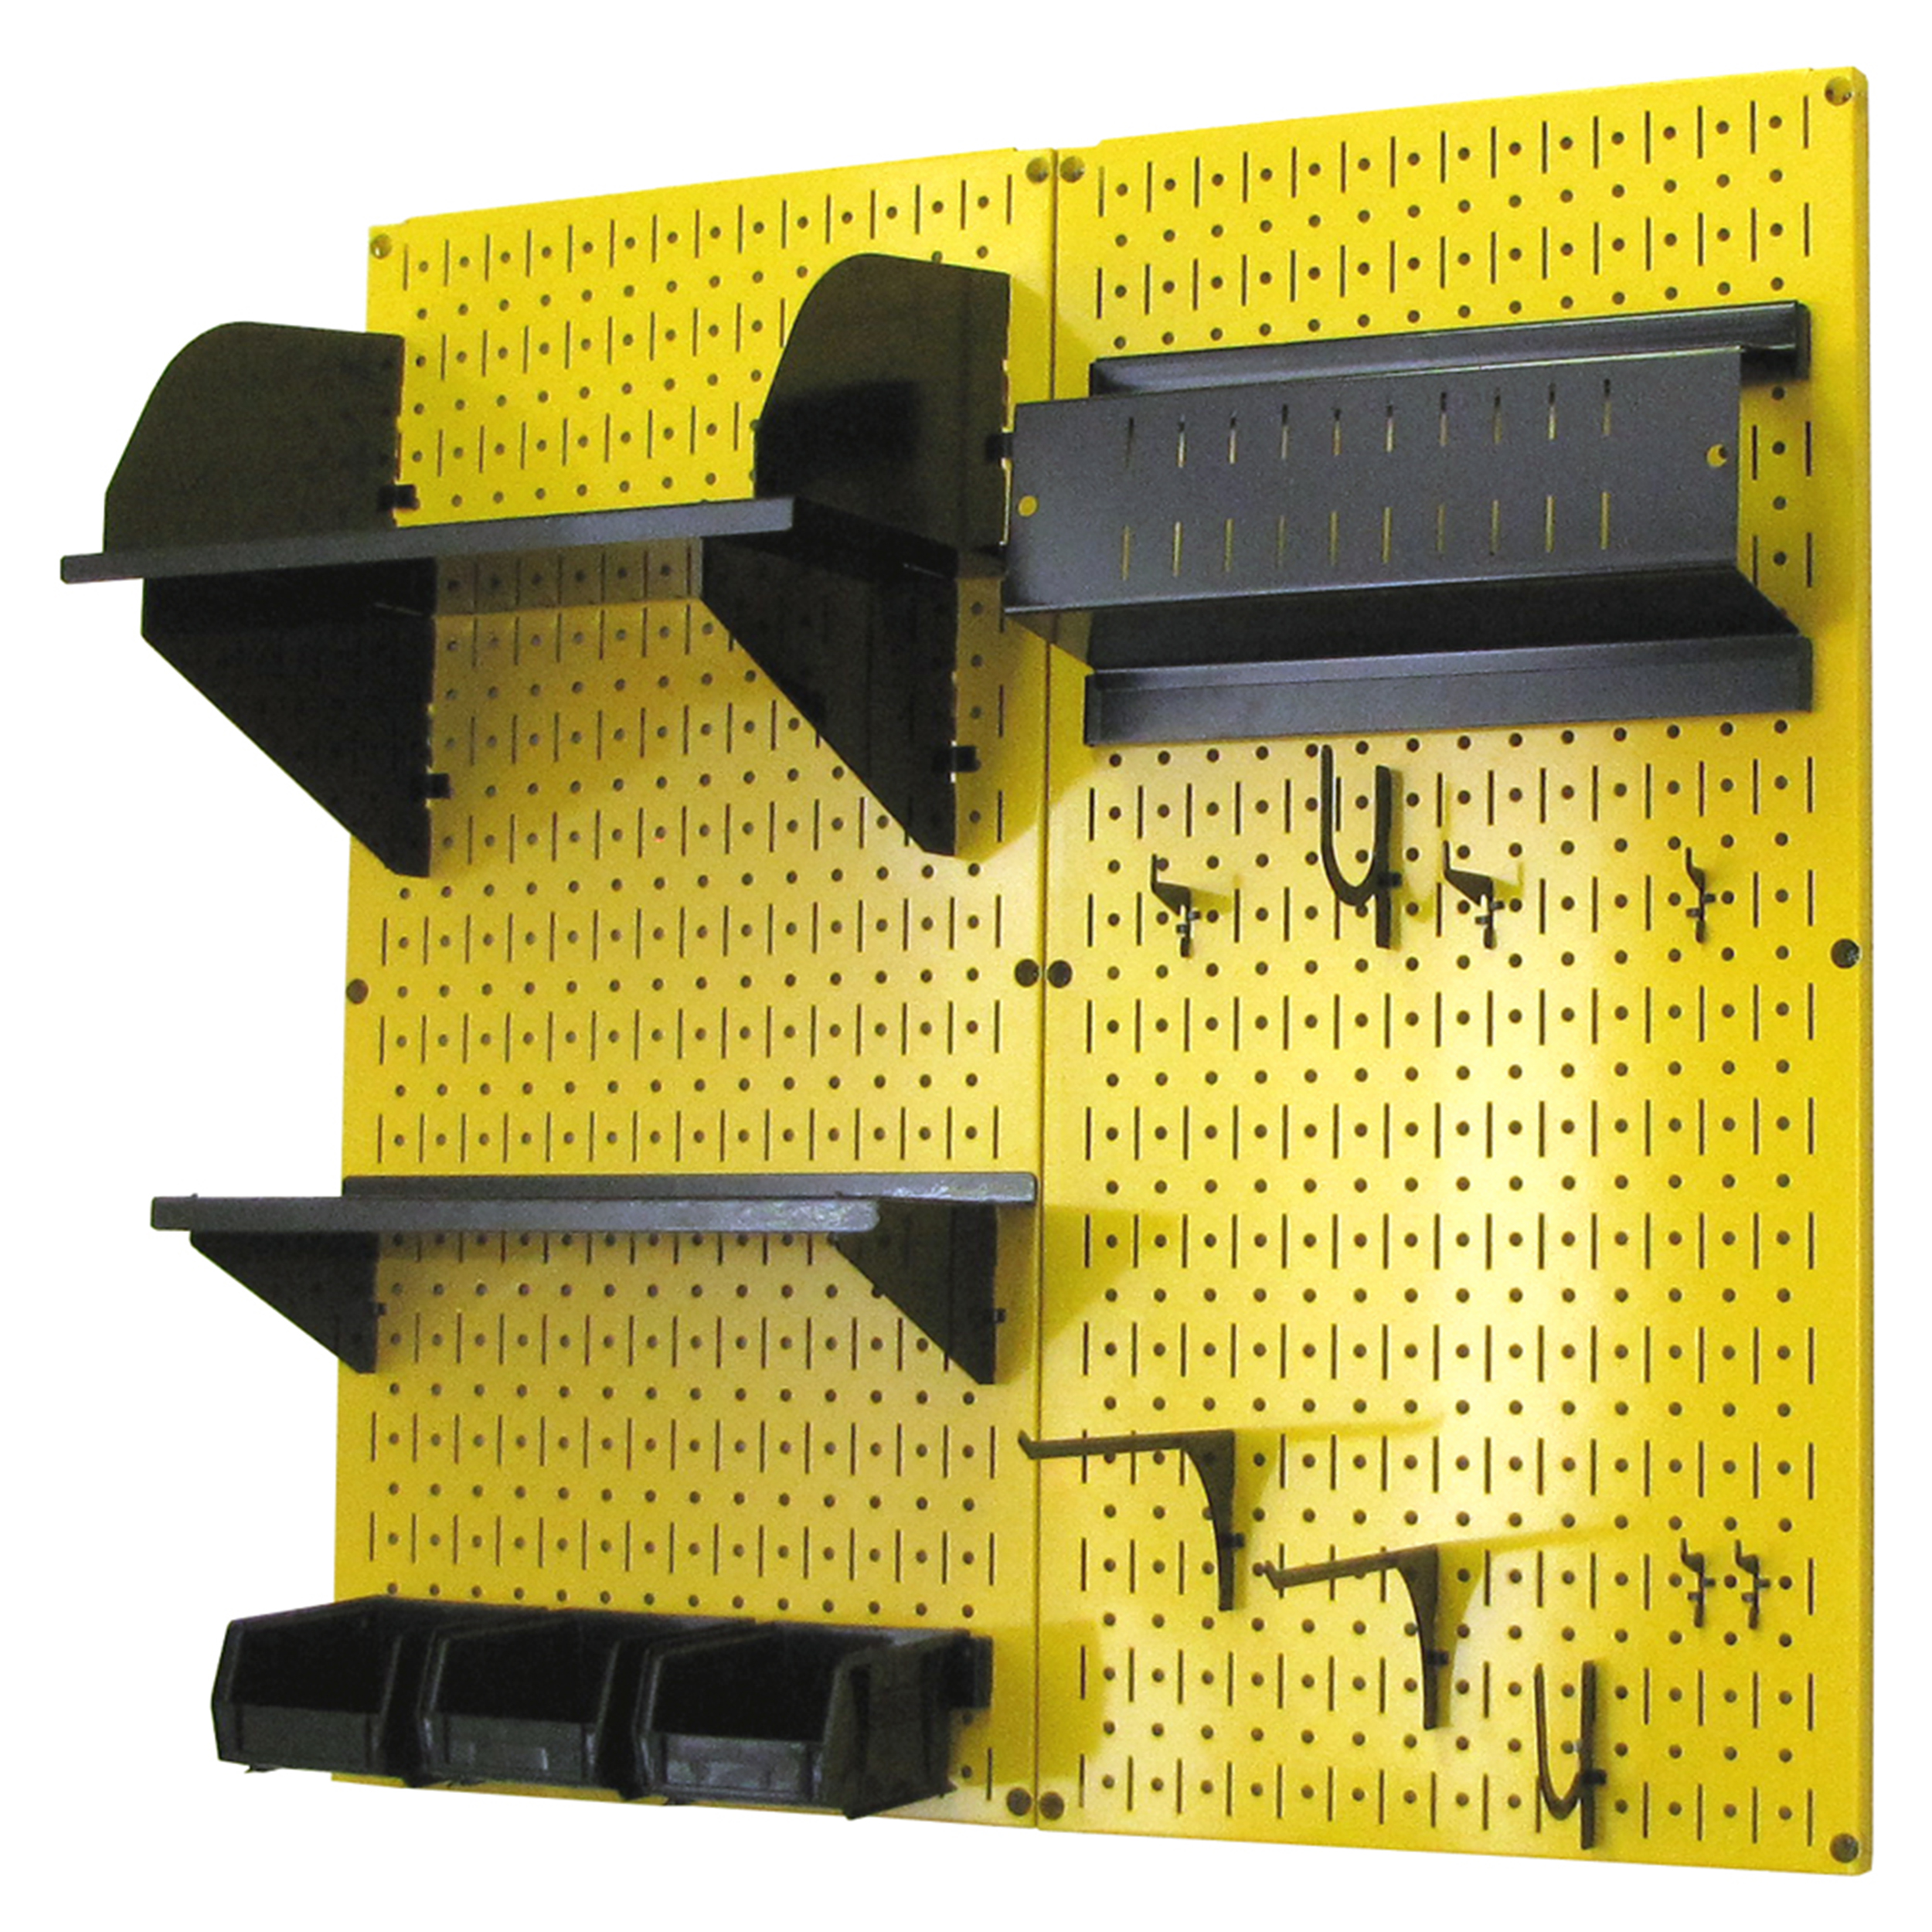 Pegboard Hobby Craft Pegboard Organizer Storage Kit With Yellow Pegboard And Black Accessories